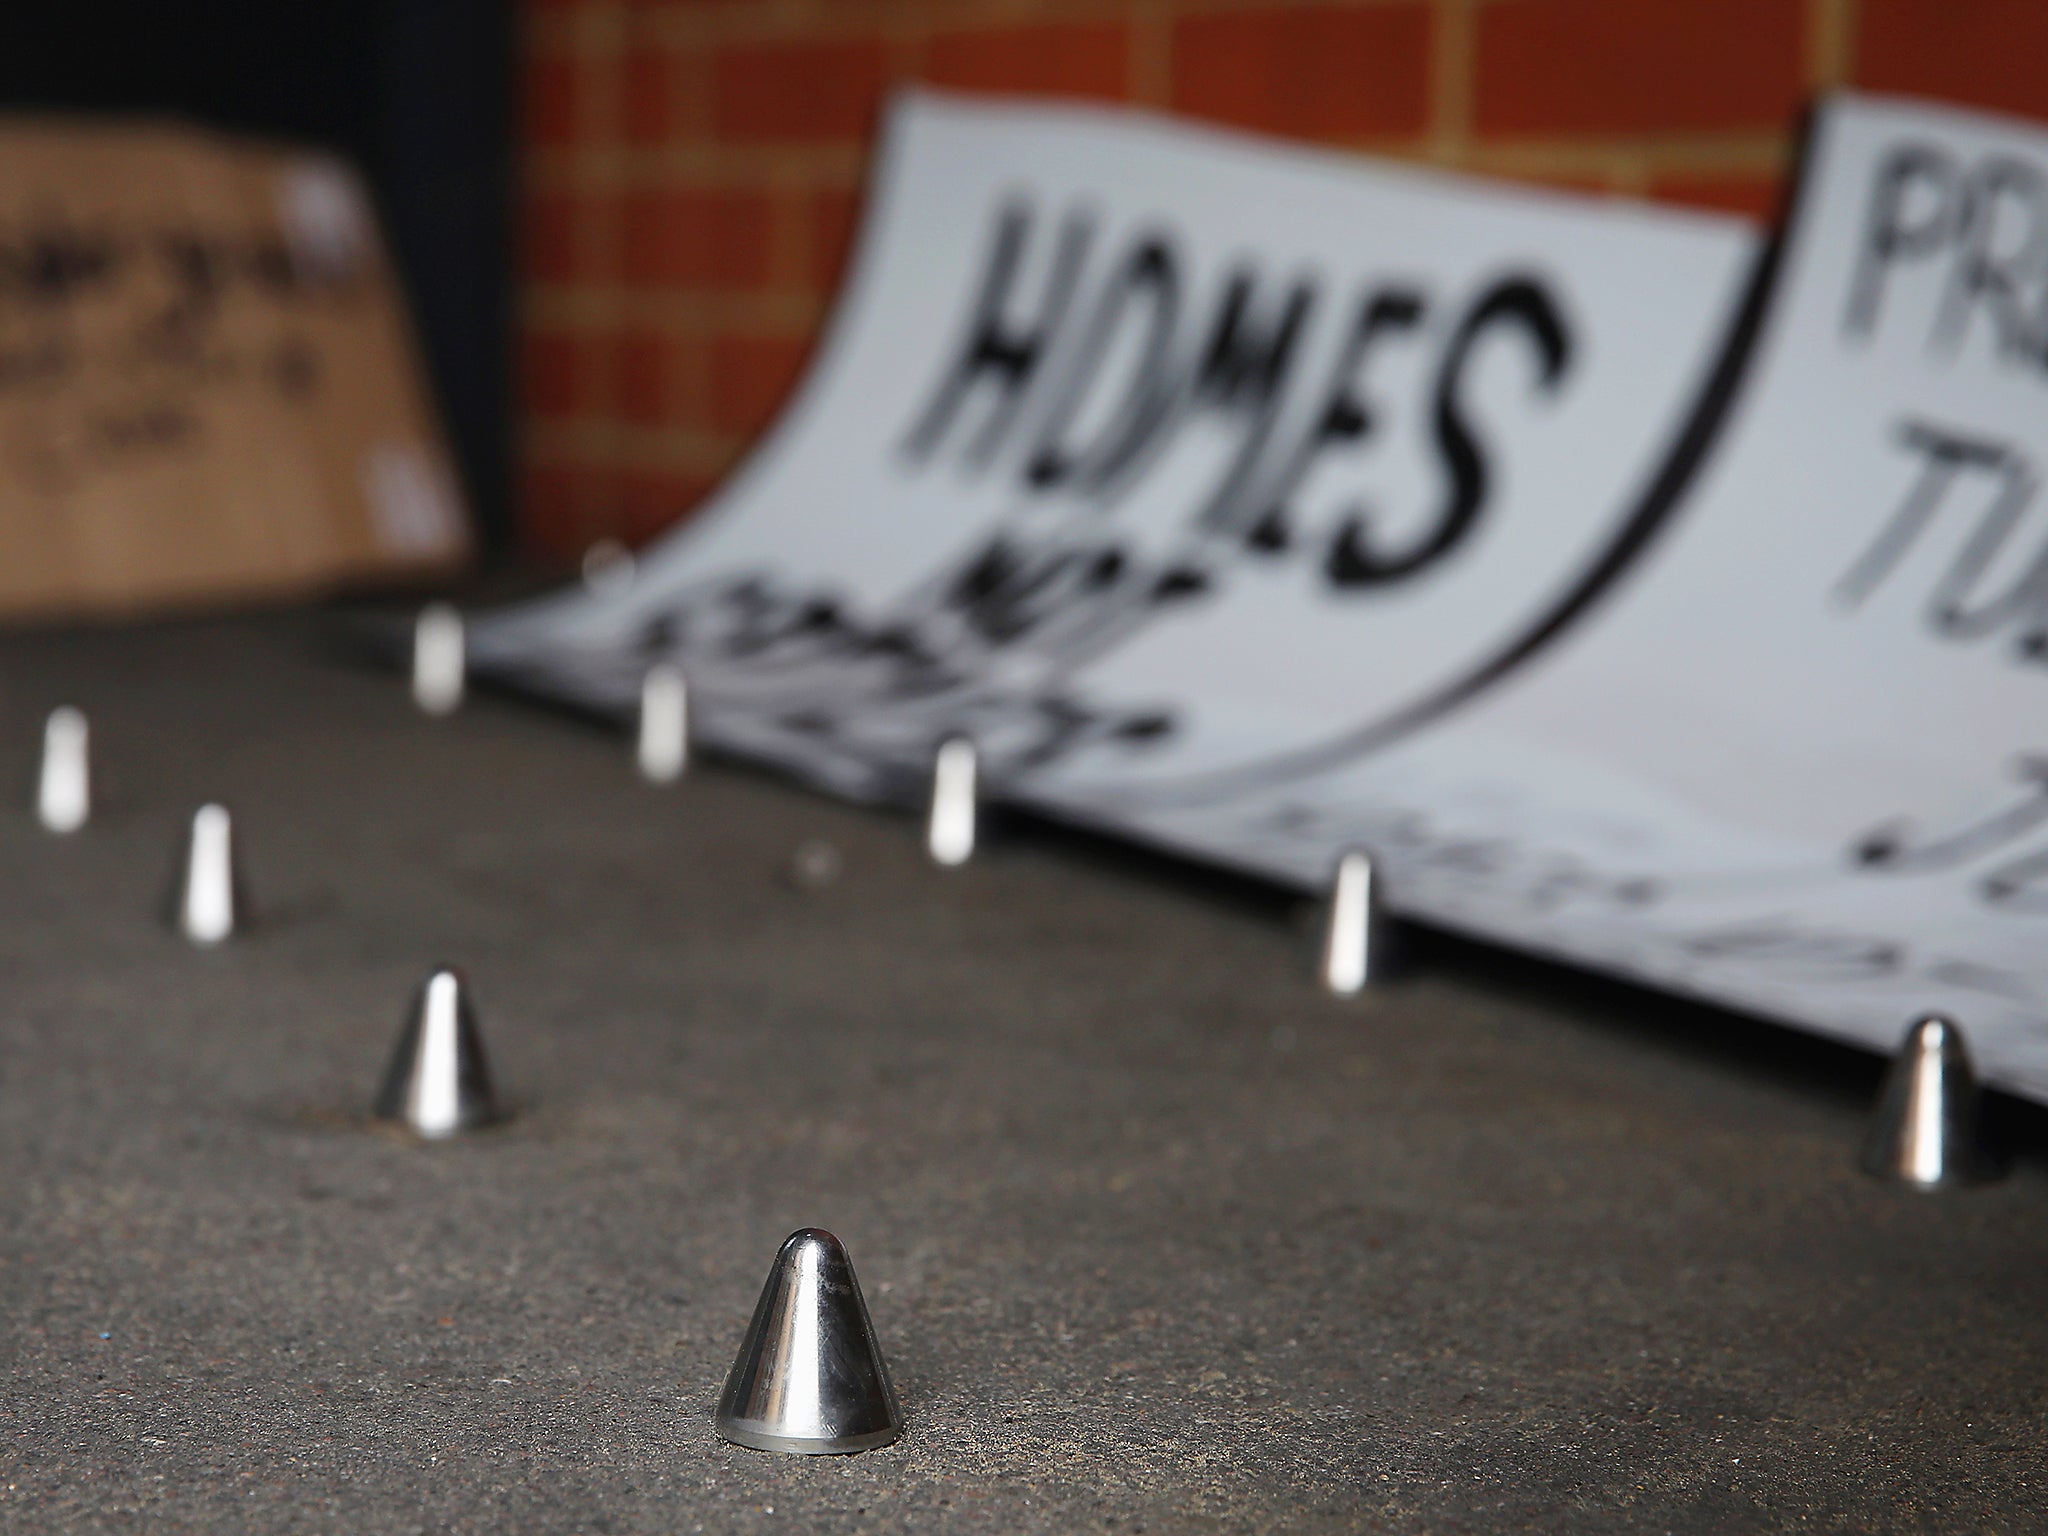 Metal spikes, alarms, bright lights and fines are all being used to dissuade rough sleepers